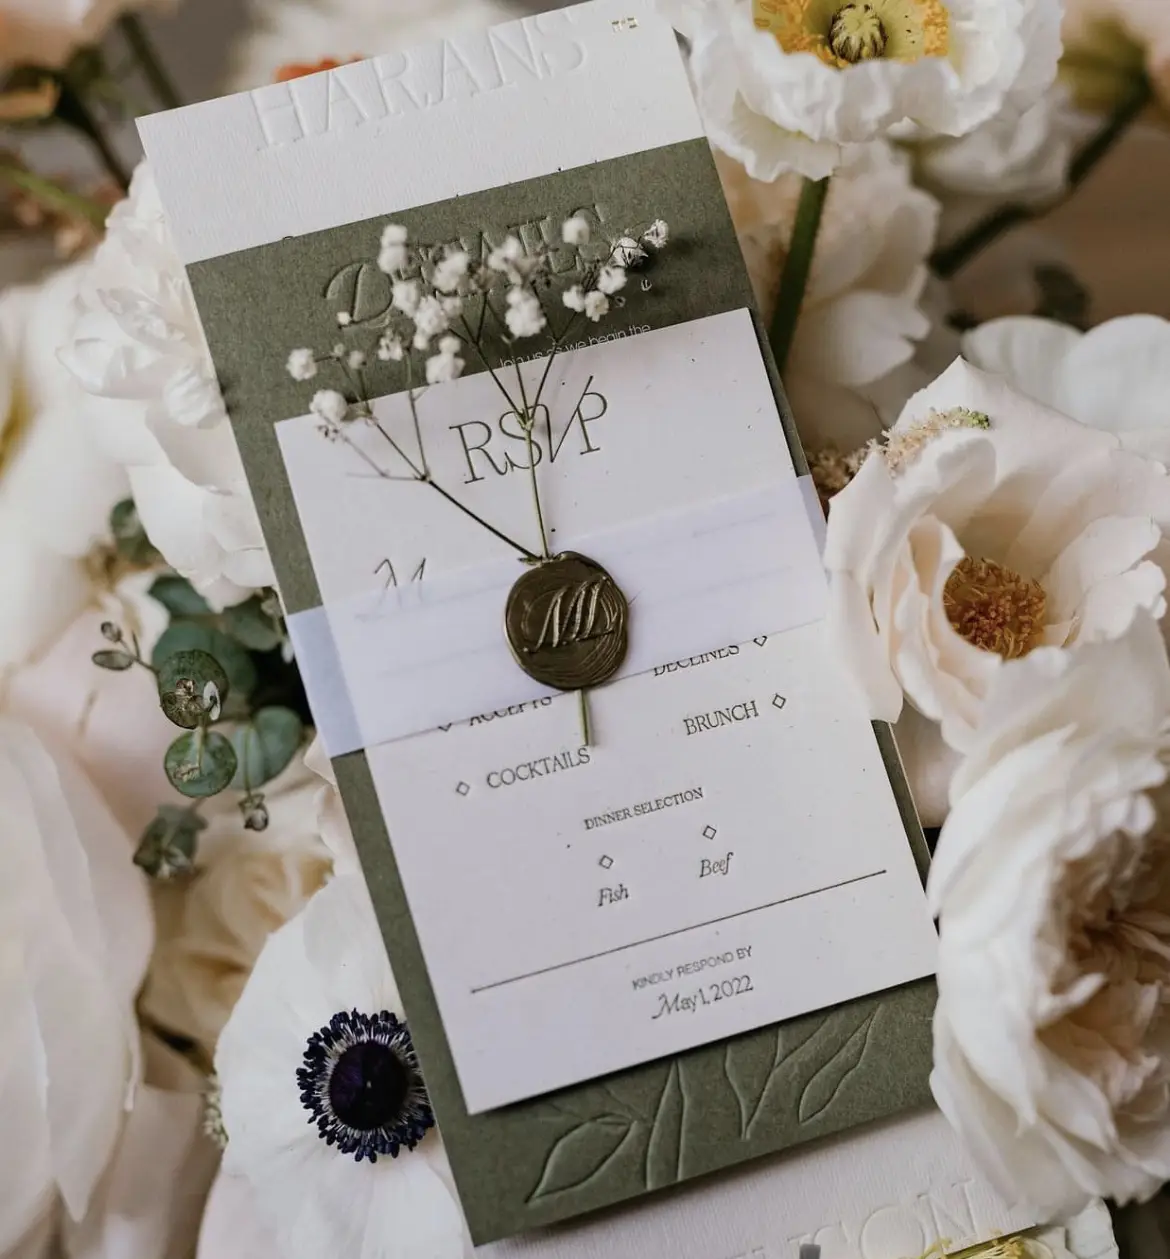 DIY wedding invitations ✨🥂, Gallery posted by MelissaLevenson